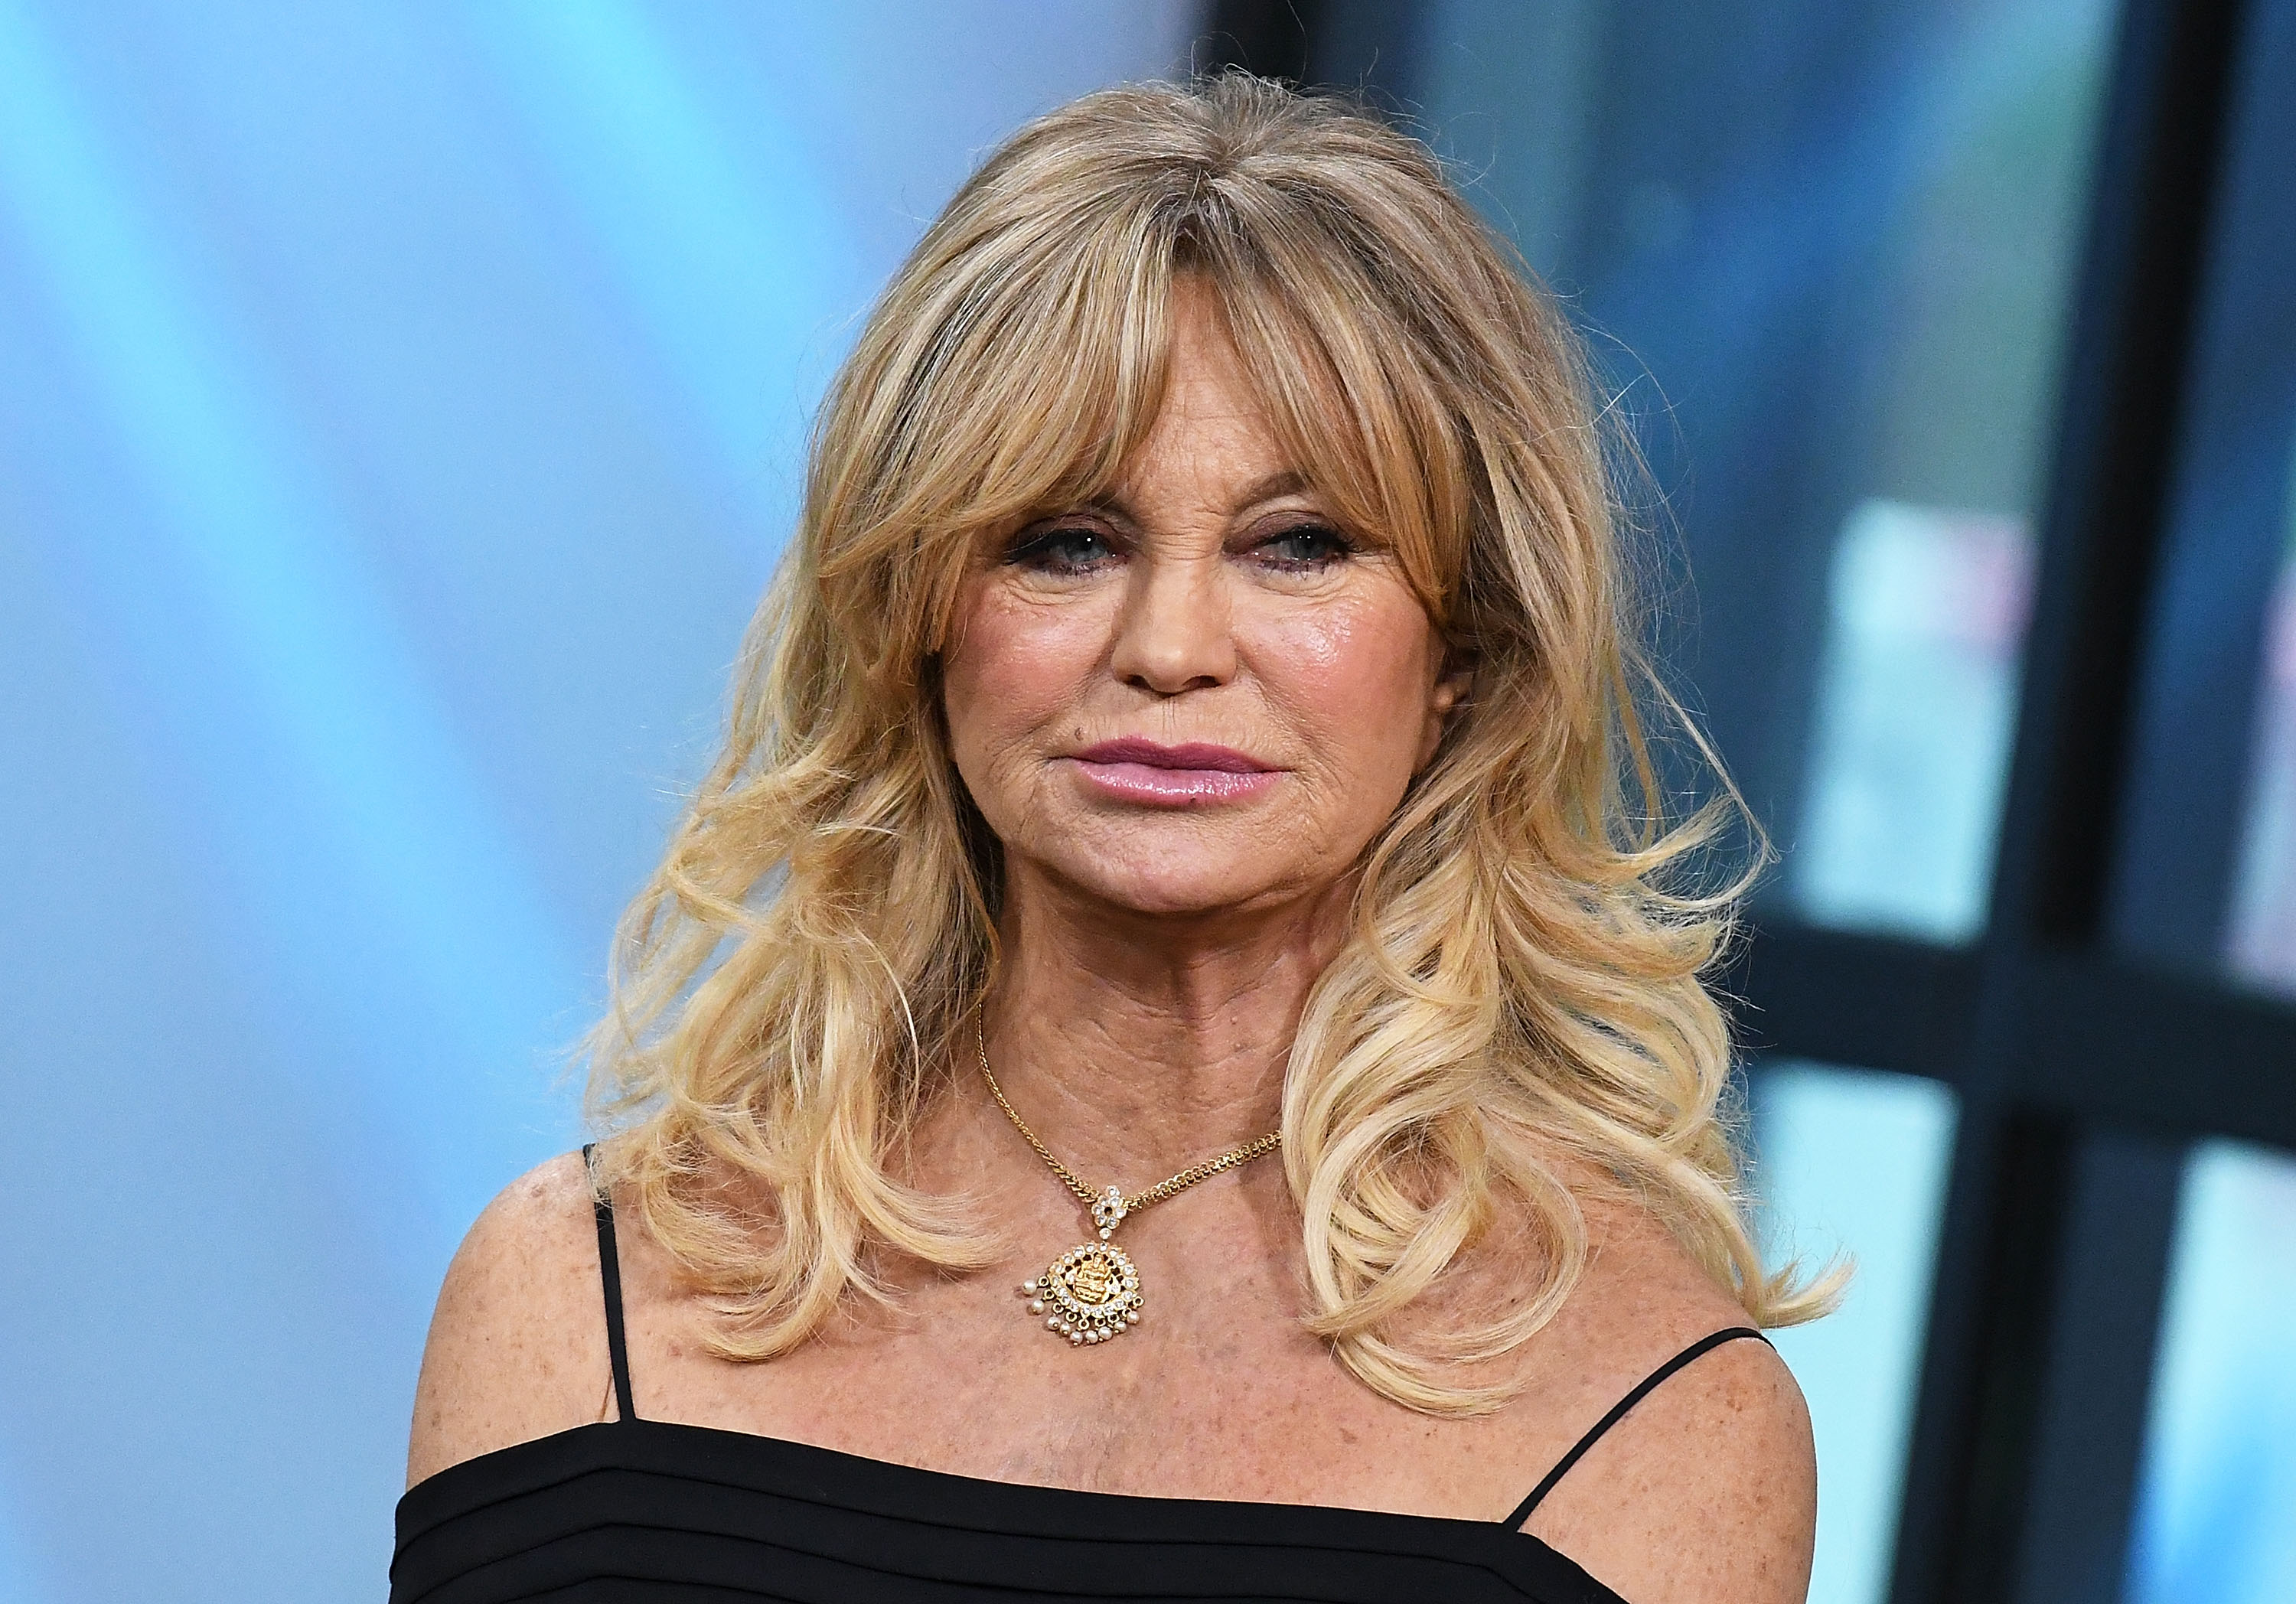 Goldie Hawn visits Build Series to discuss her new comedy "Snatched" at Build Studio on May 2, 2017 in New York City | Photo: Getty Images